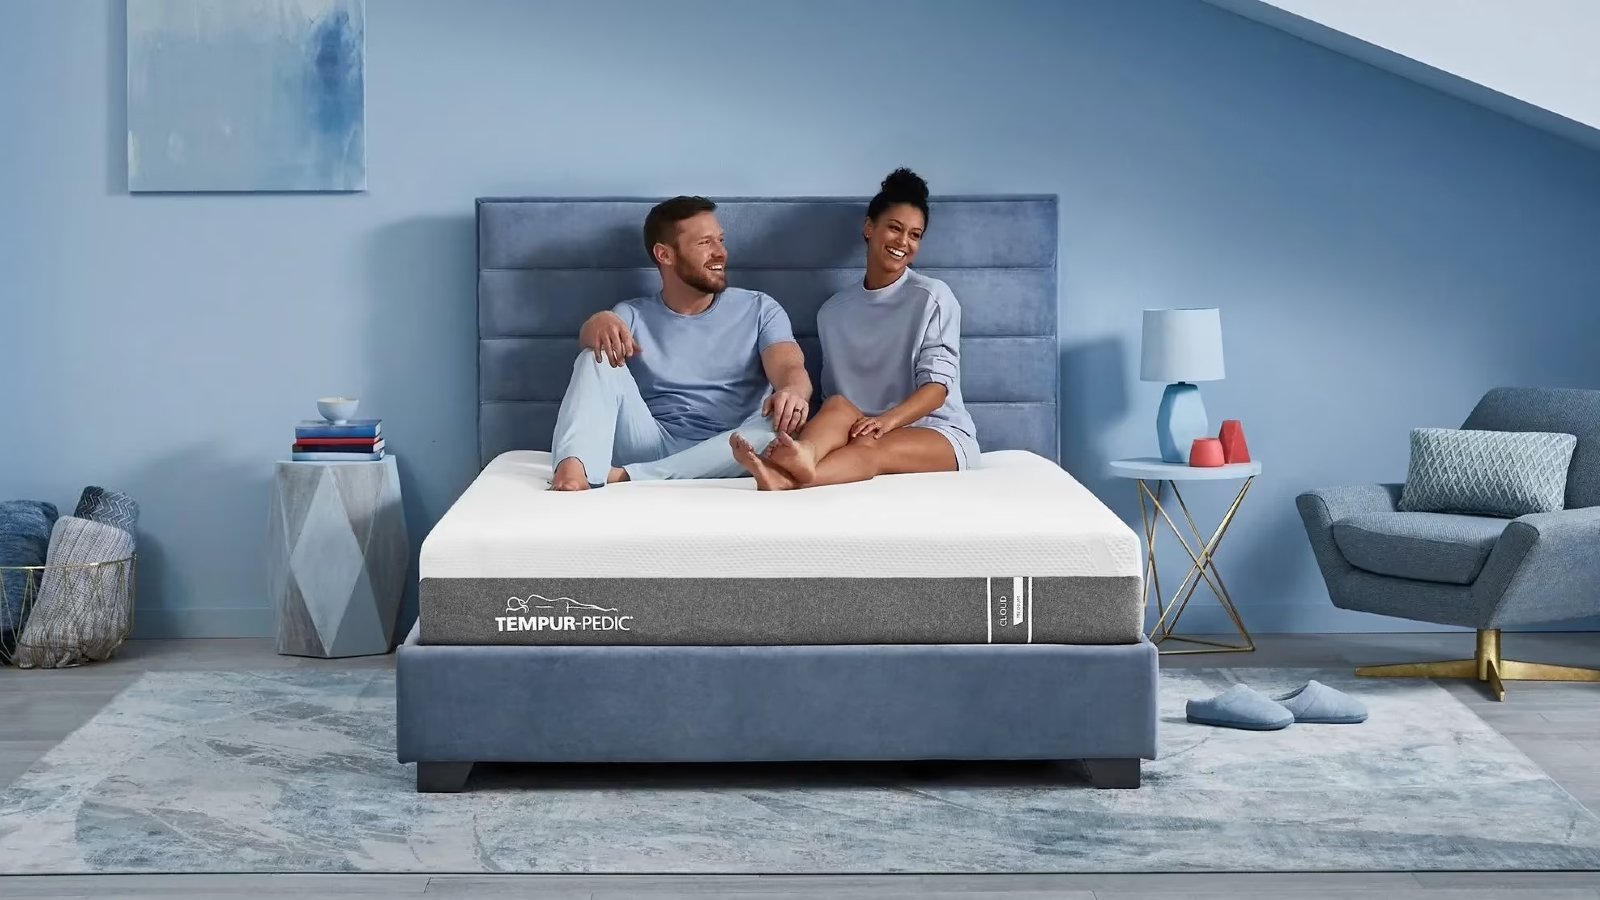 TempurPedic Black Friday Mattress Sale Has Started Save Today! The